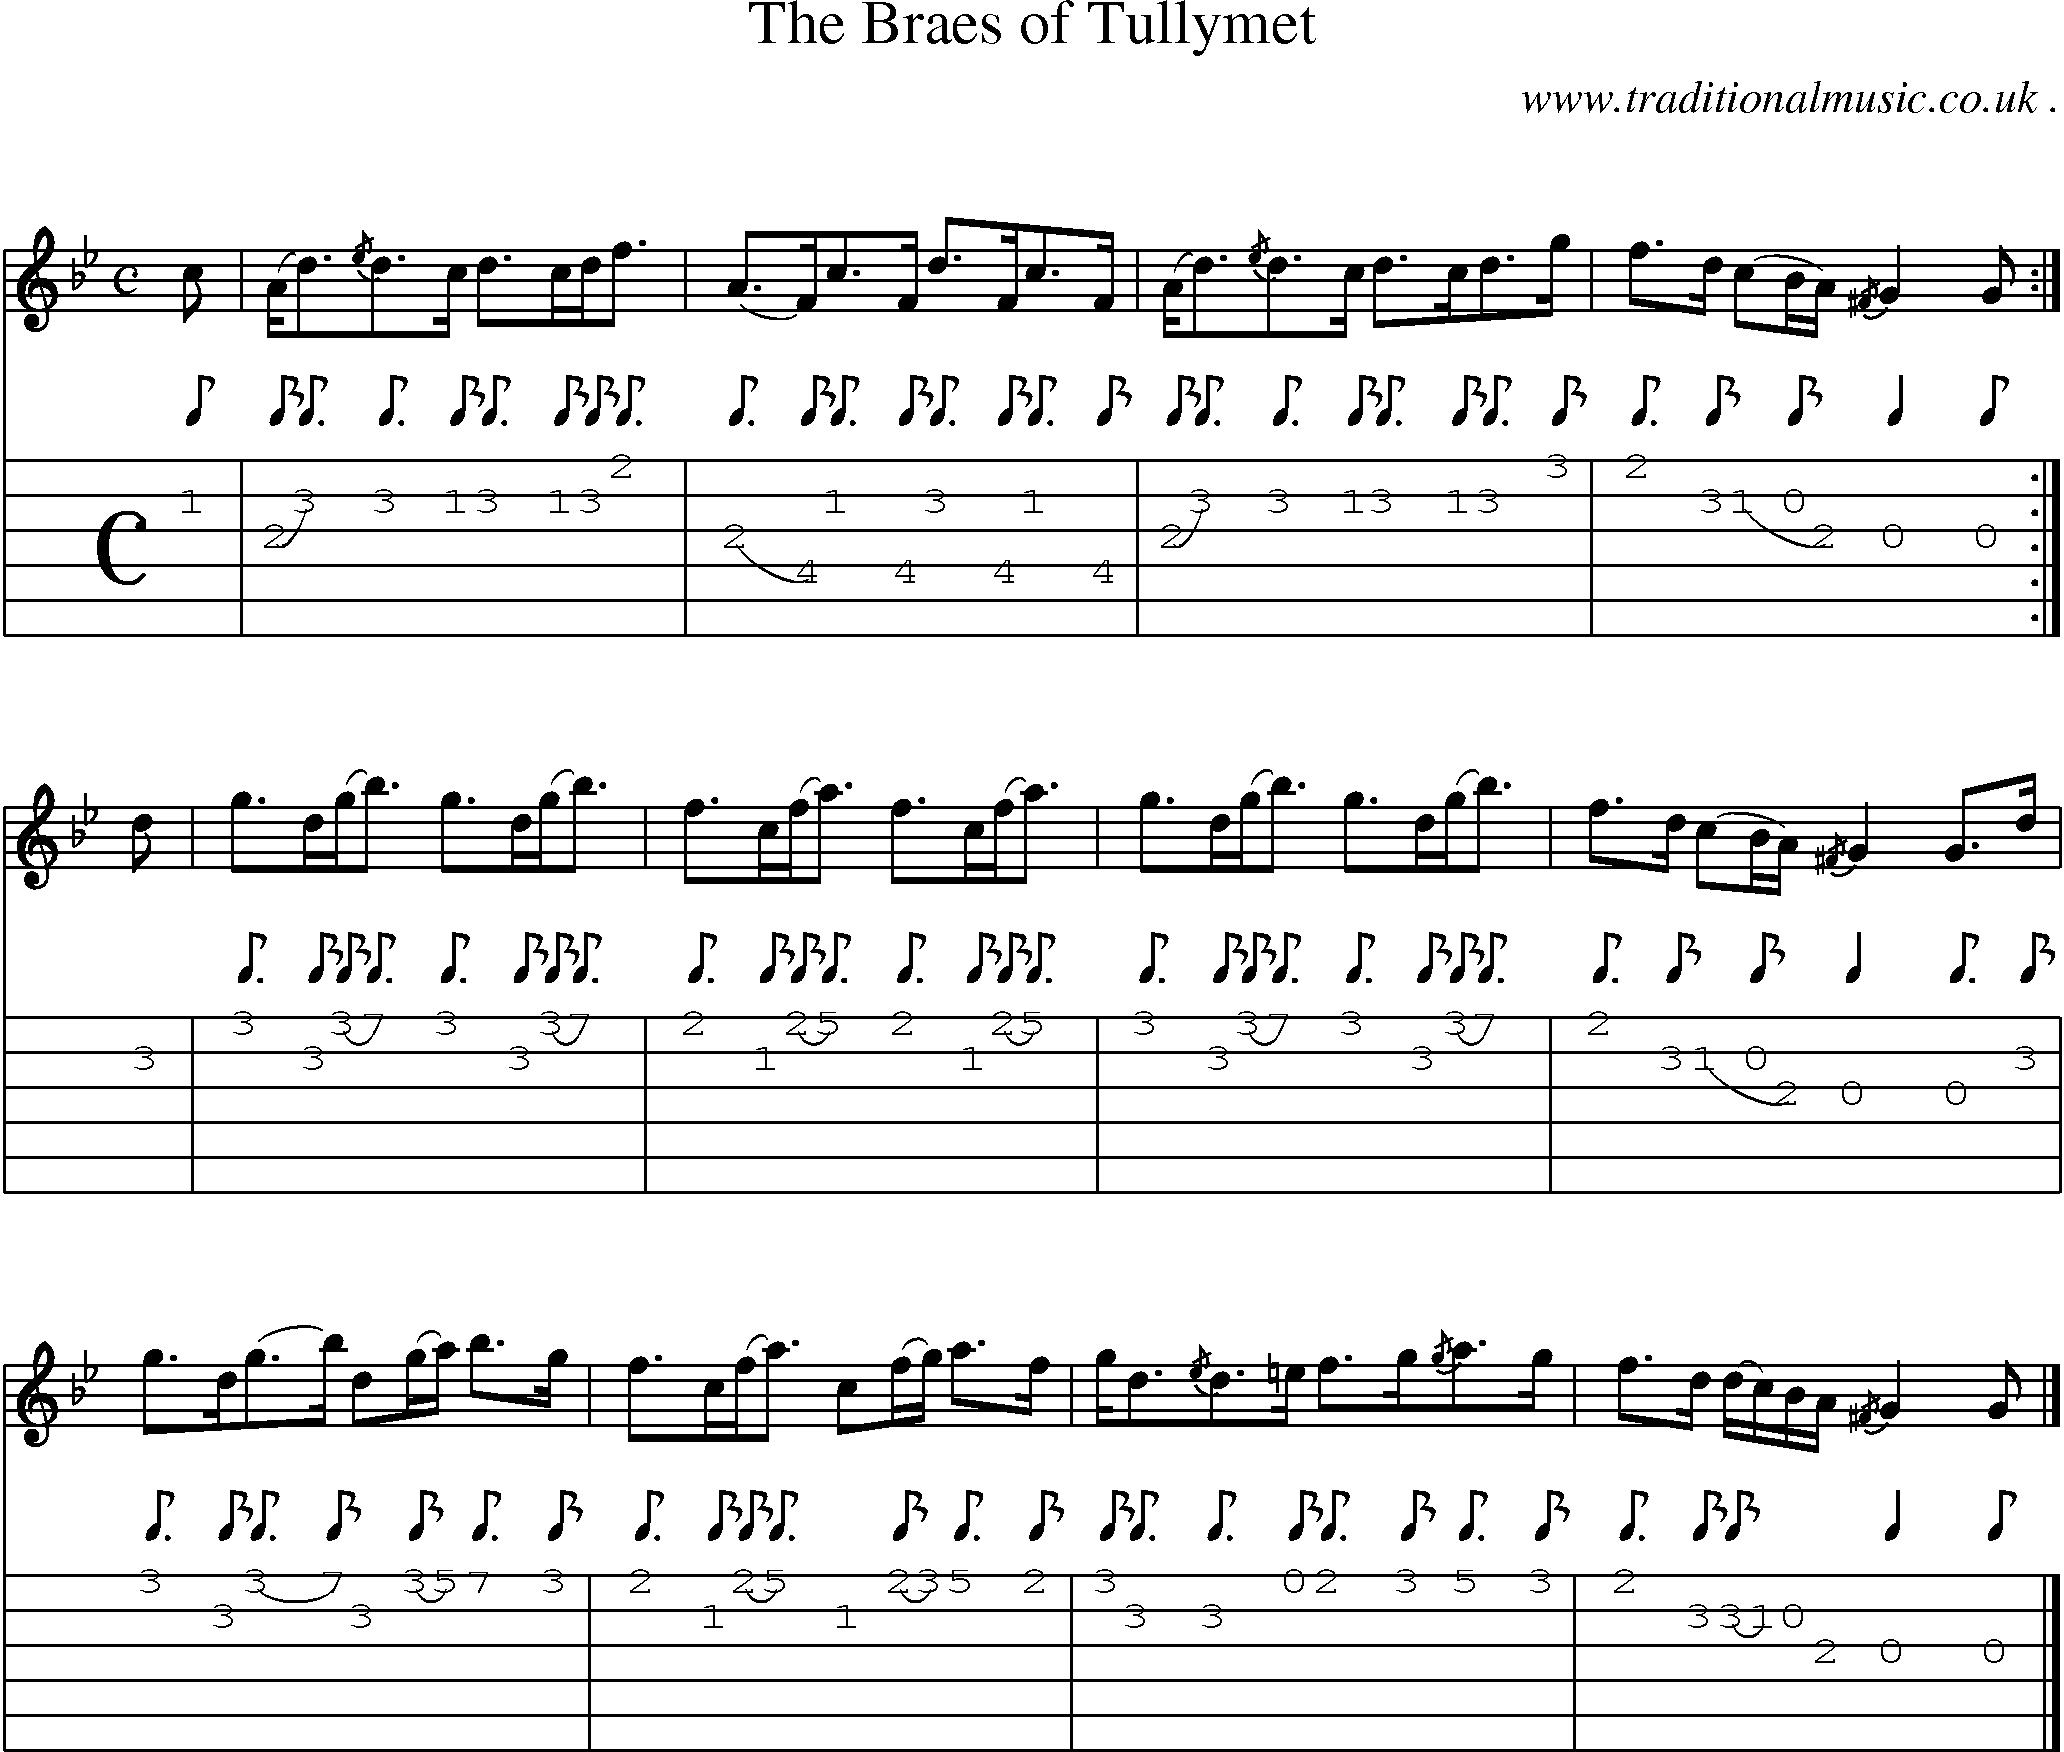 Sheet-music  score, Chords and Guitar Tabs for The Braes Of Tullymet